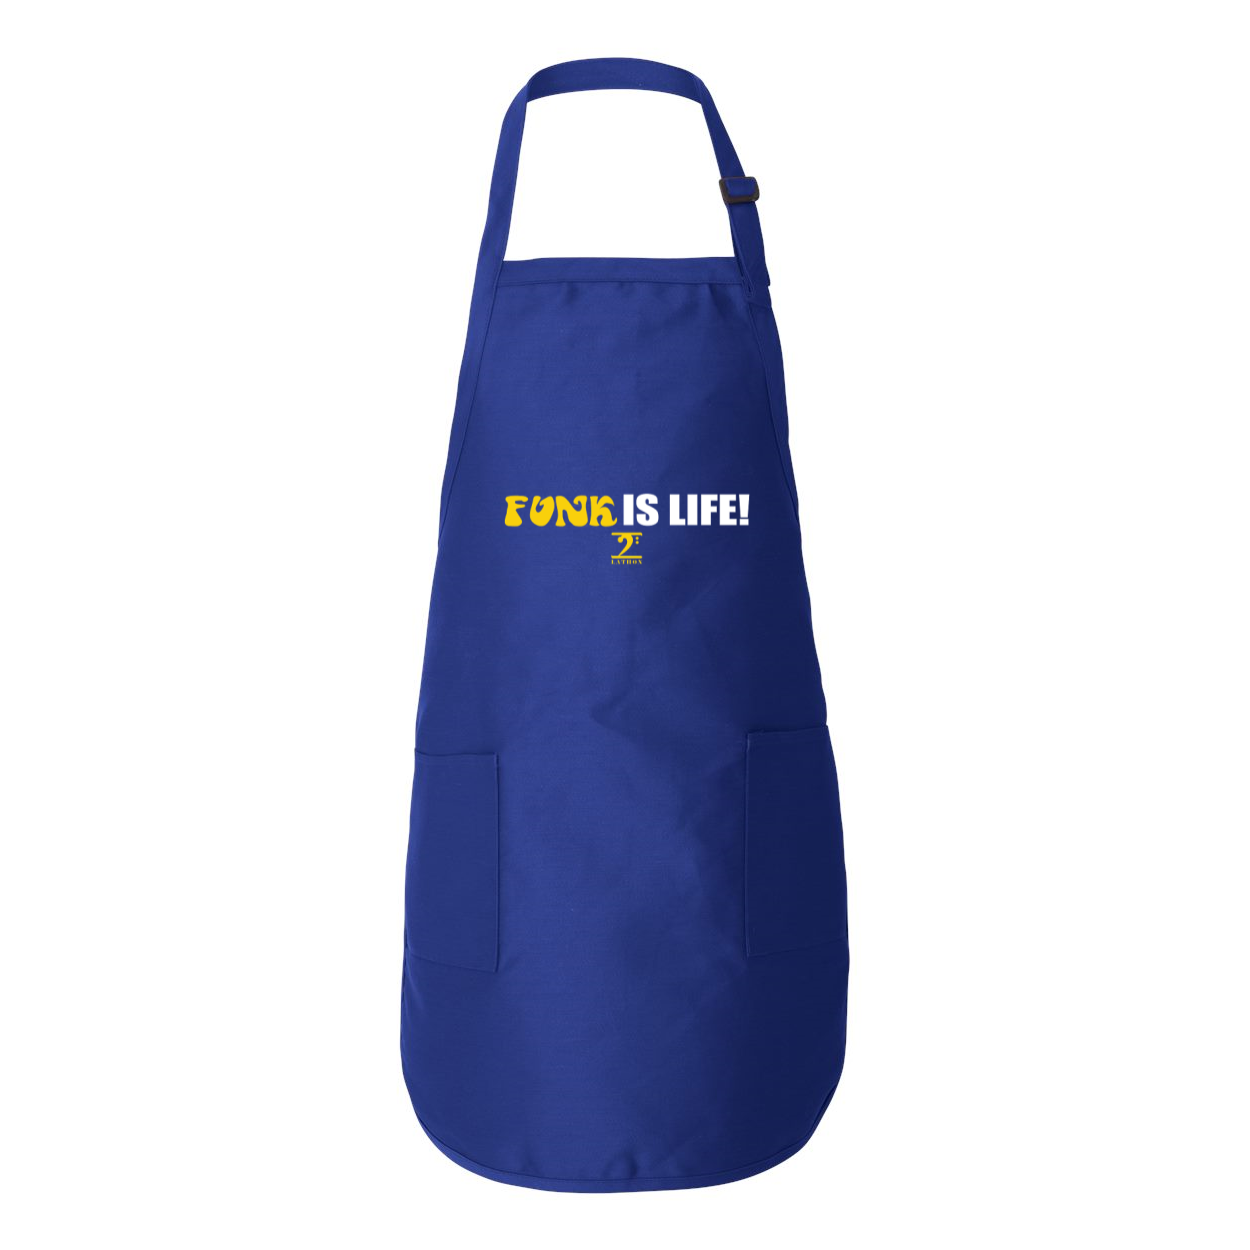 FUNK IS LIFE Full-Length Apron with Pockets - Lathon Bass Wear